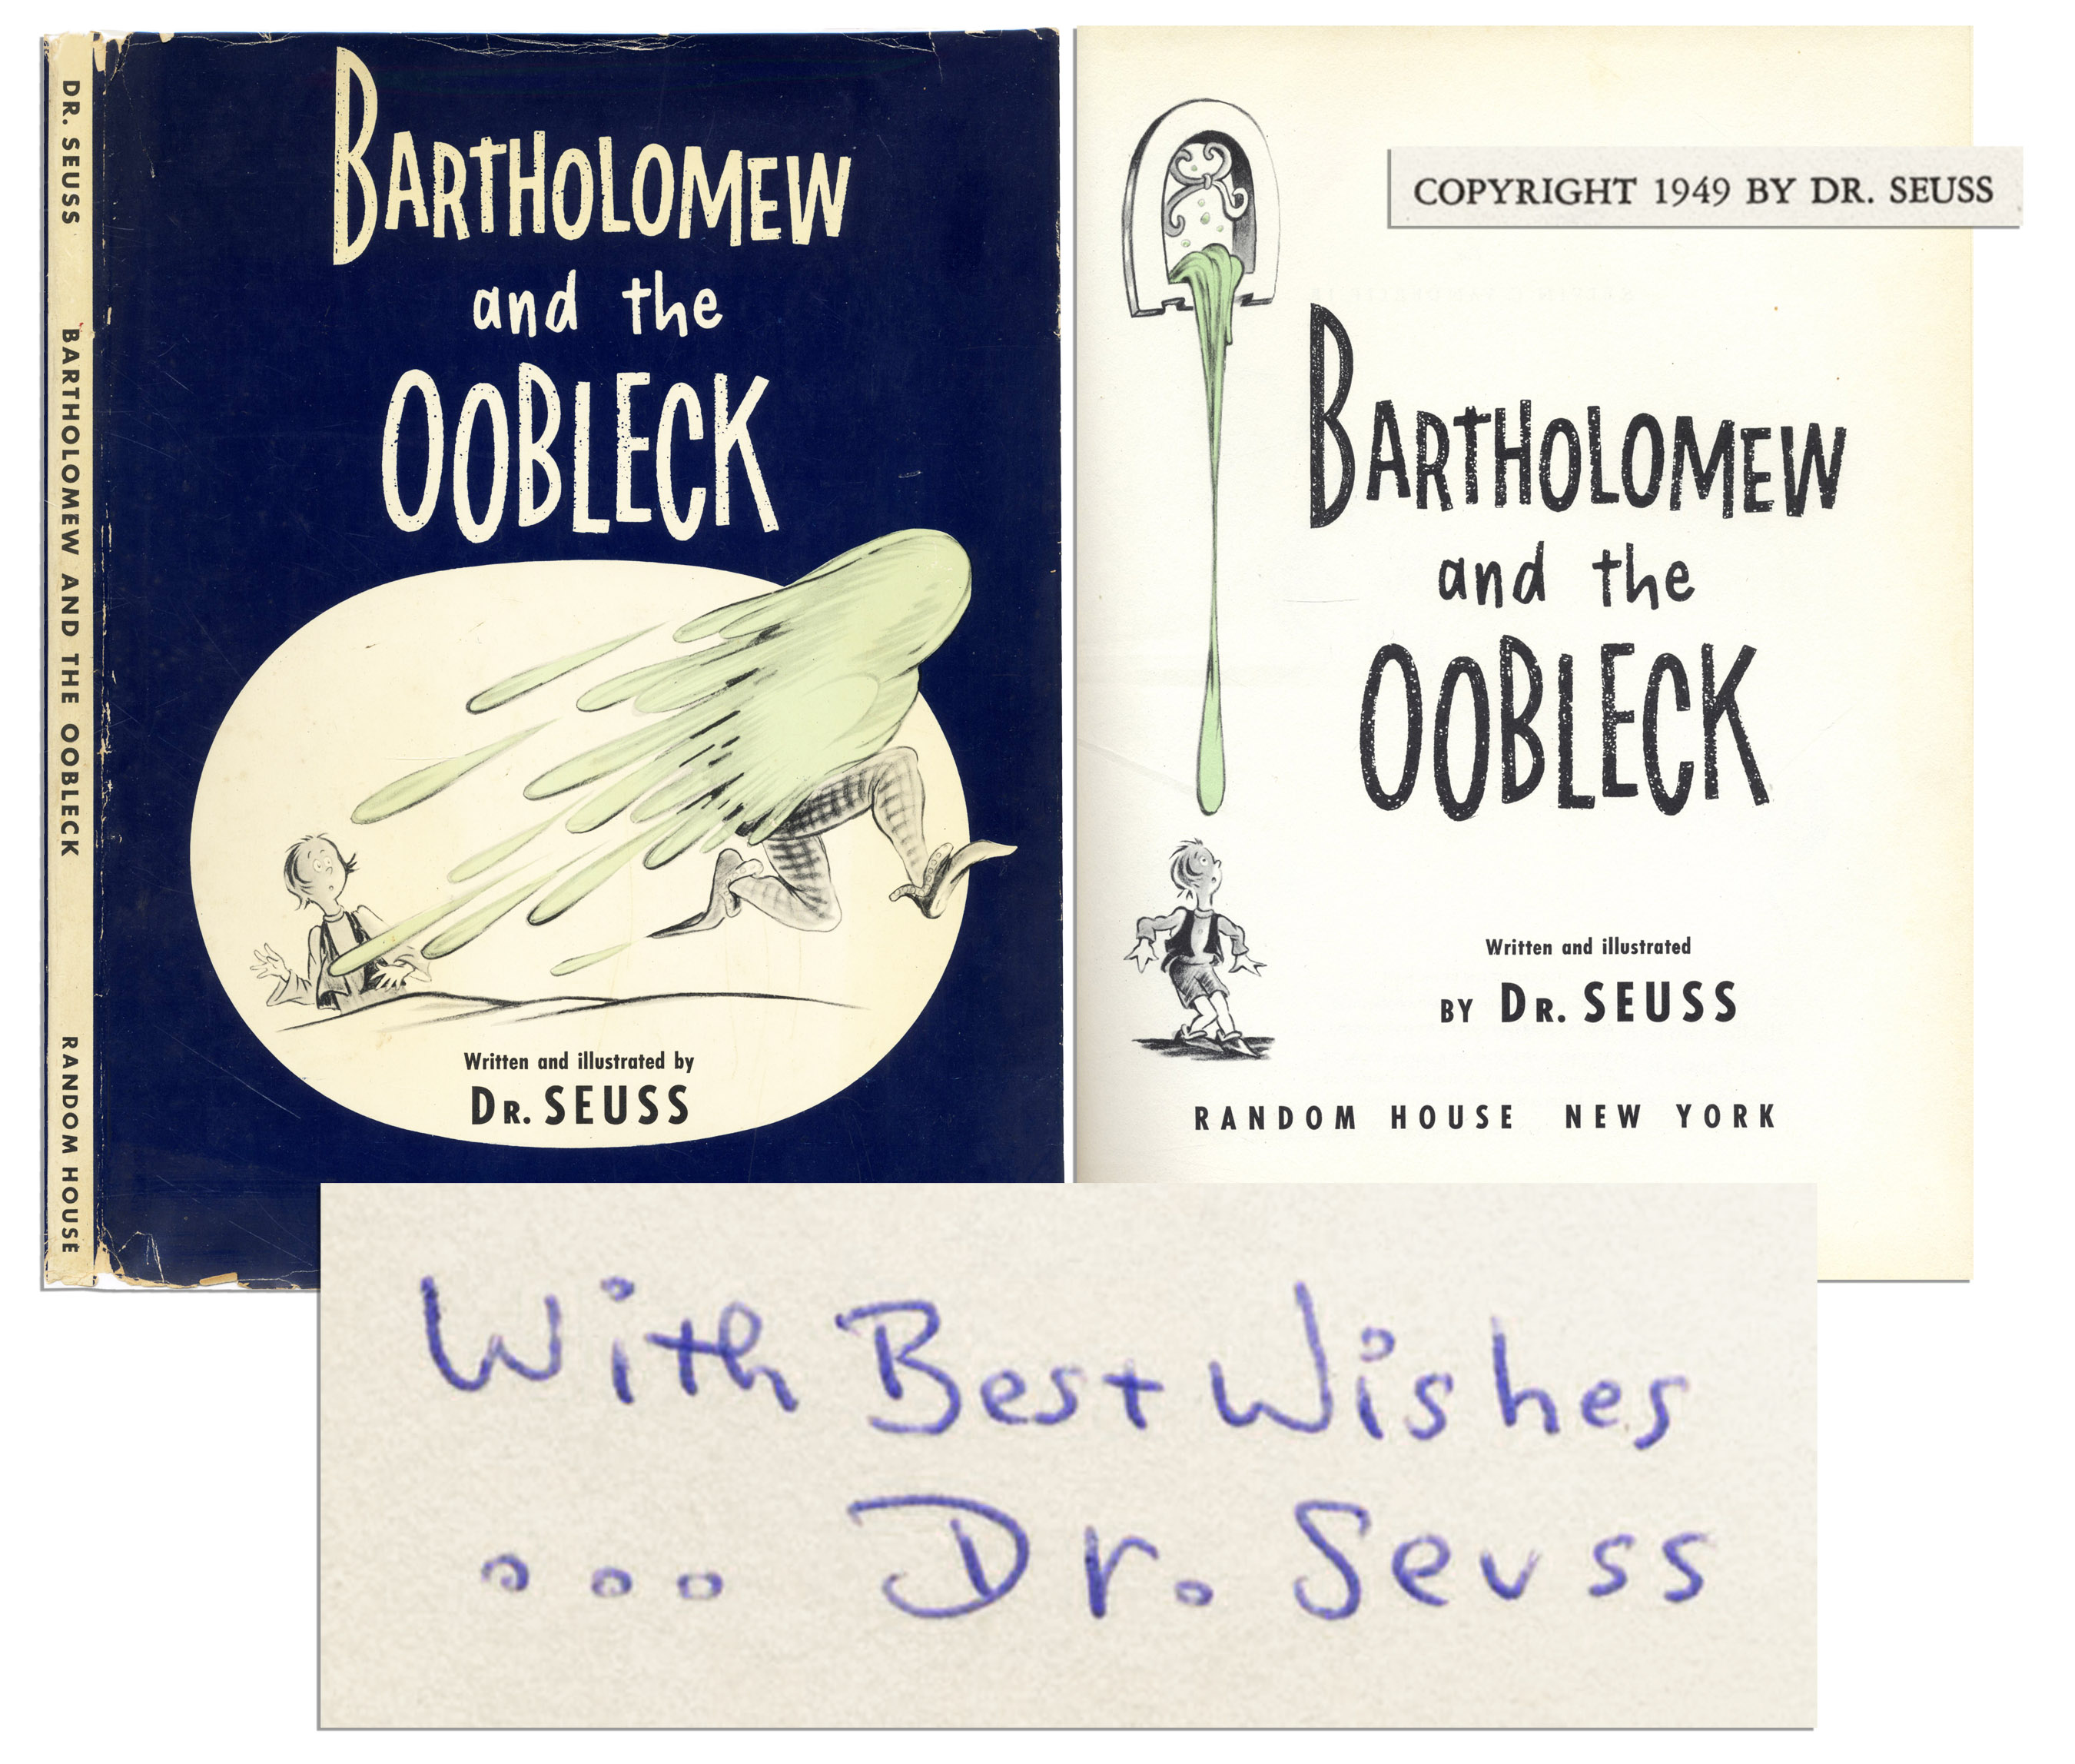 Dr. Seuss Autograph Dr. Seuss Signed First Edition of "Bartholomew and the Oobleck" -- Scarce 1949 Title Signed